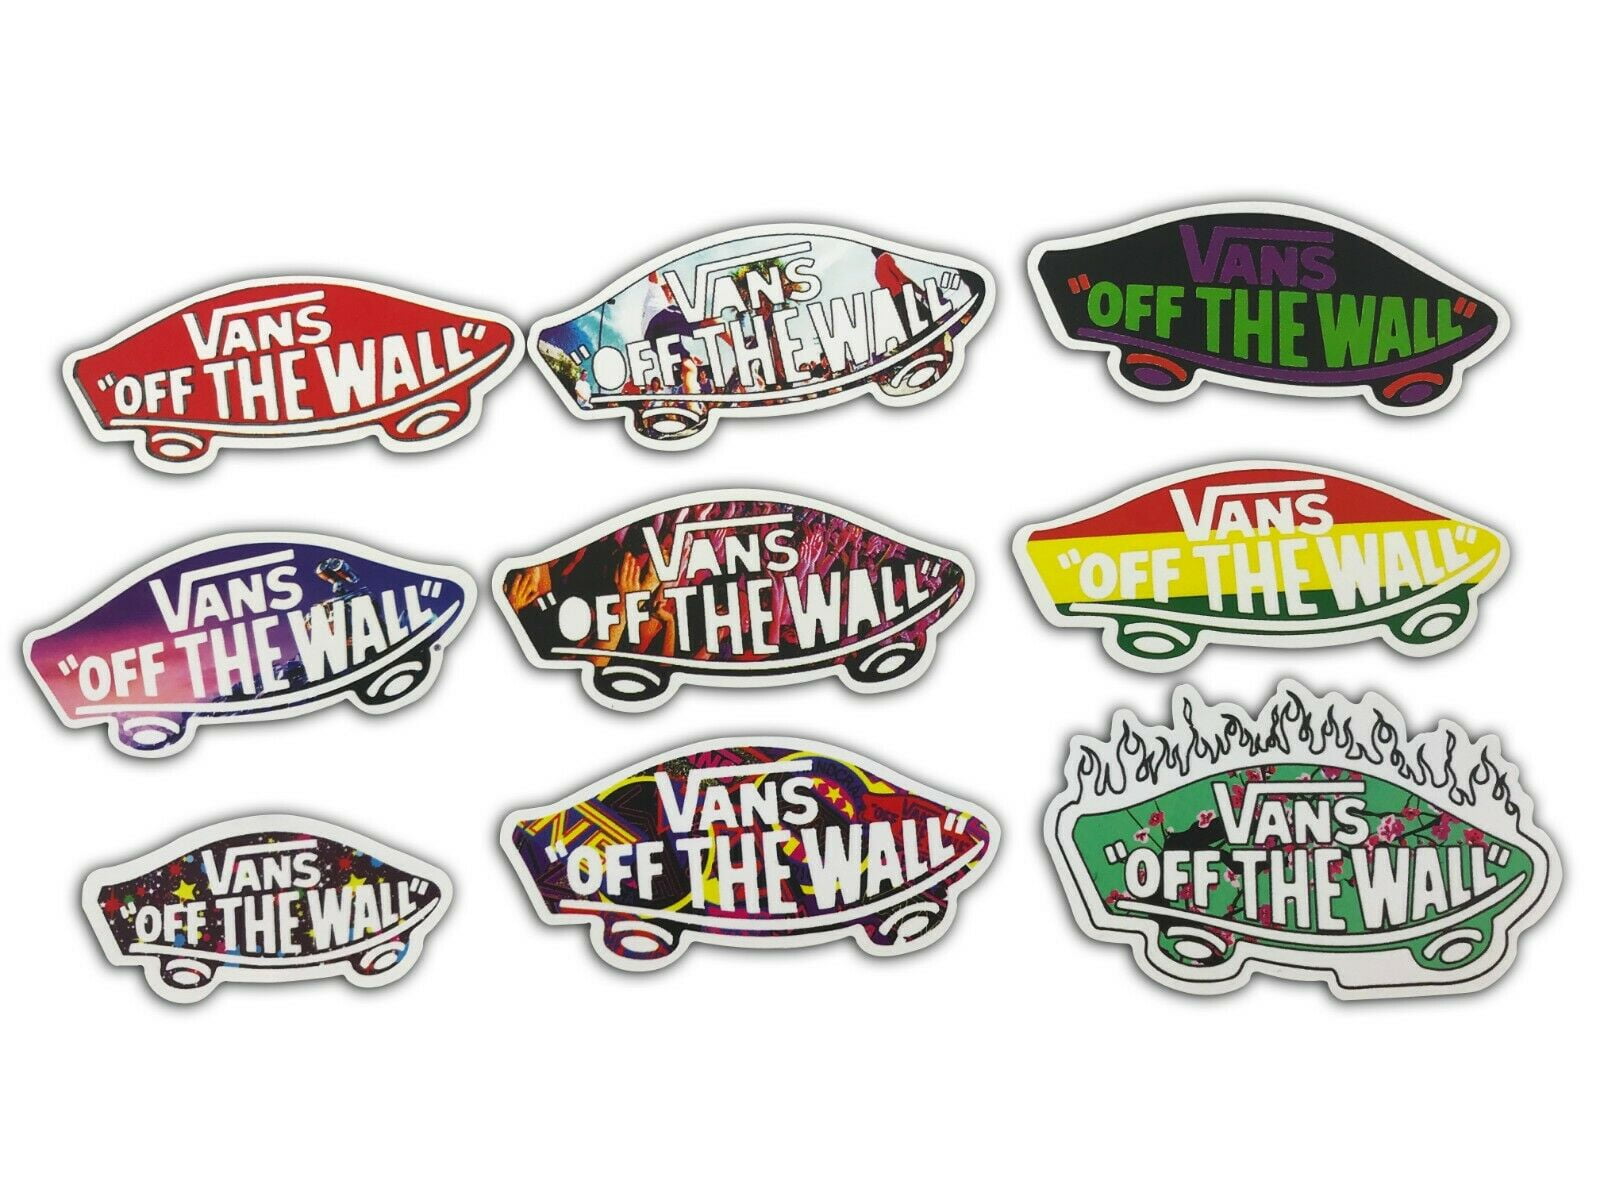 Details about   VANS OFF THE WALL Logo Decal Skateboard Sticker 